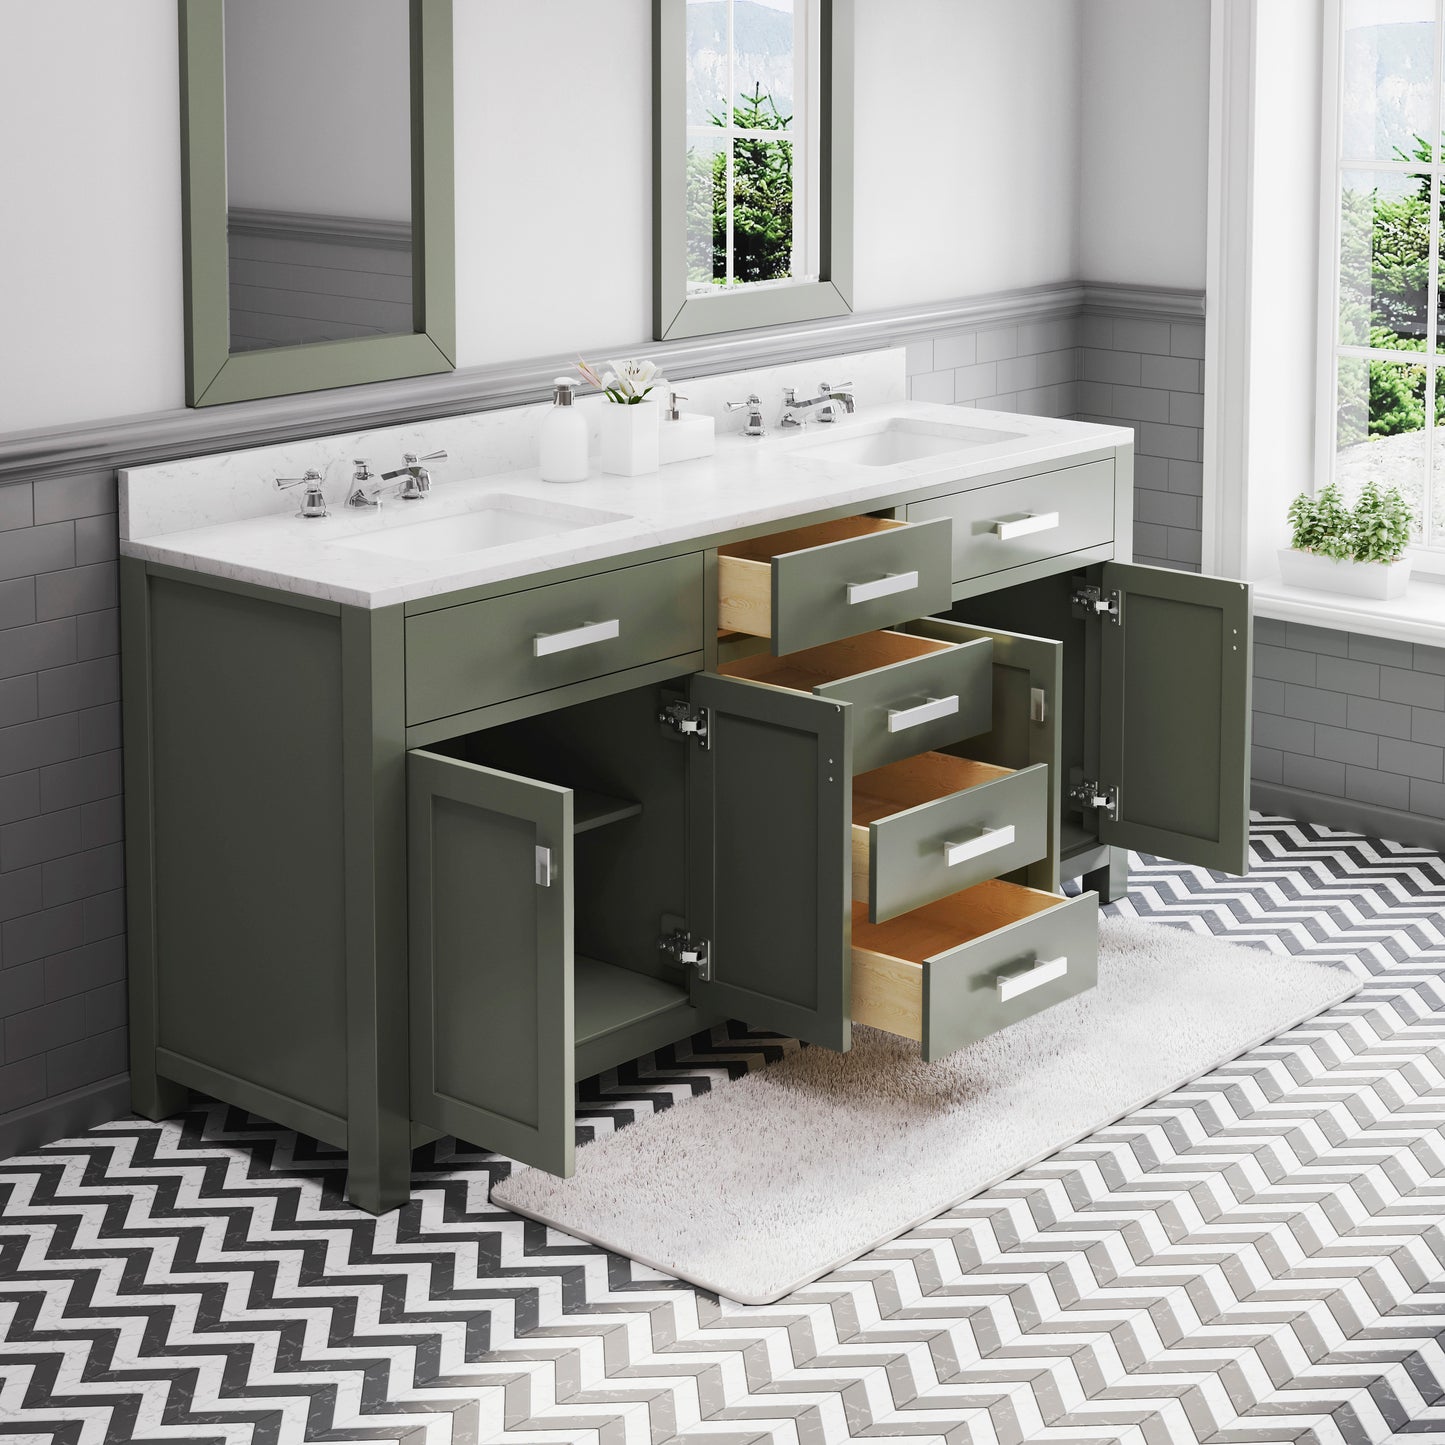 MADISON 72"W x 34"H Glacial Green Double-Sink Vanity with Carrara White Marble Countertop